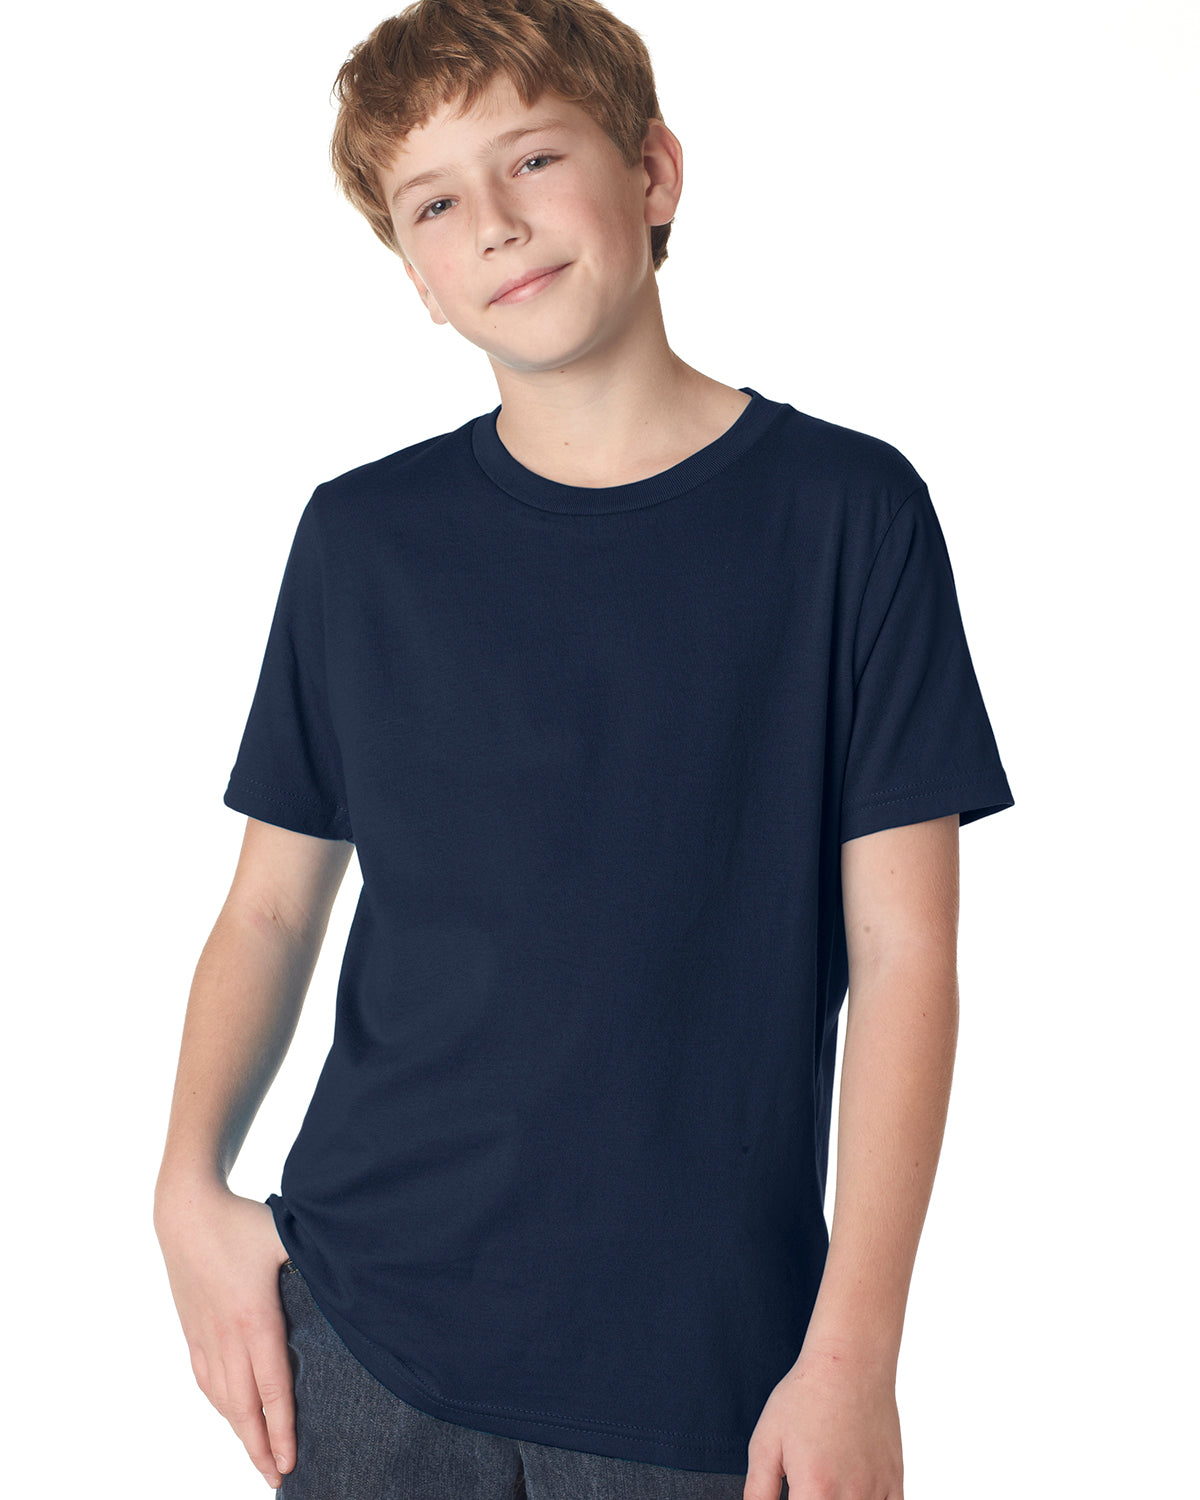 child model wearing next level youth tee in midnight navy